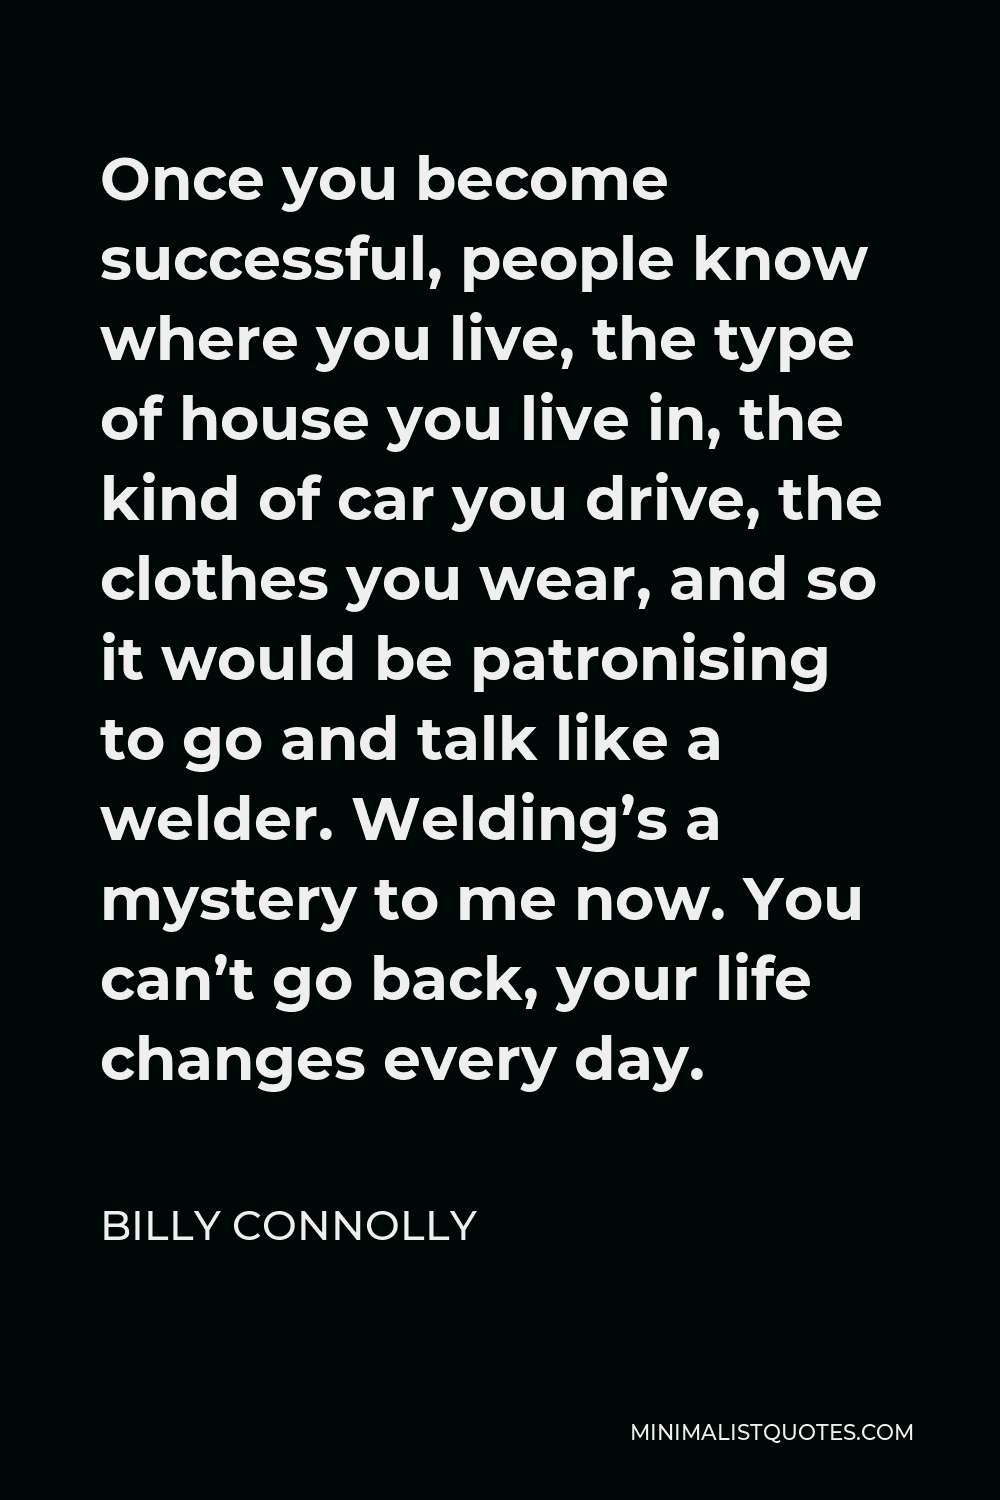 Billy Connolly Quote - Once you become successful, people know where you live, the type of house you live in, the kind of car you drive, the clothes you wear, and so it would be patronising to go and talk like a welder. Welding’s a mystery to me now. You can’t go back, your life changes every day.